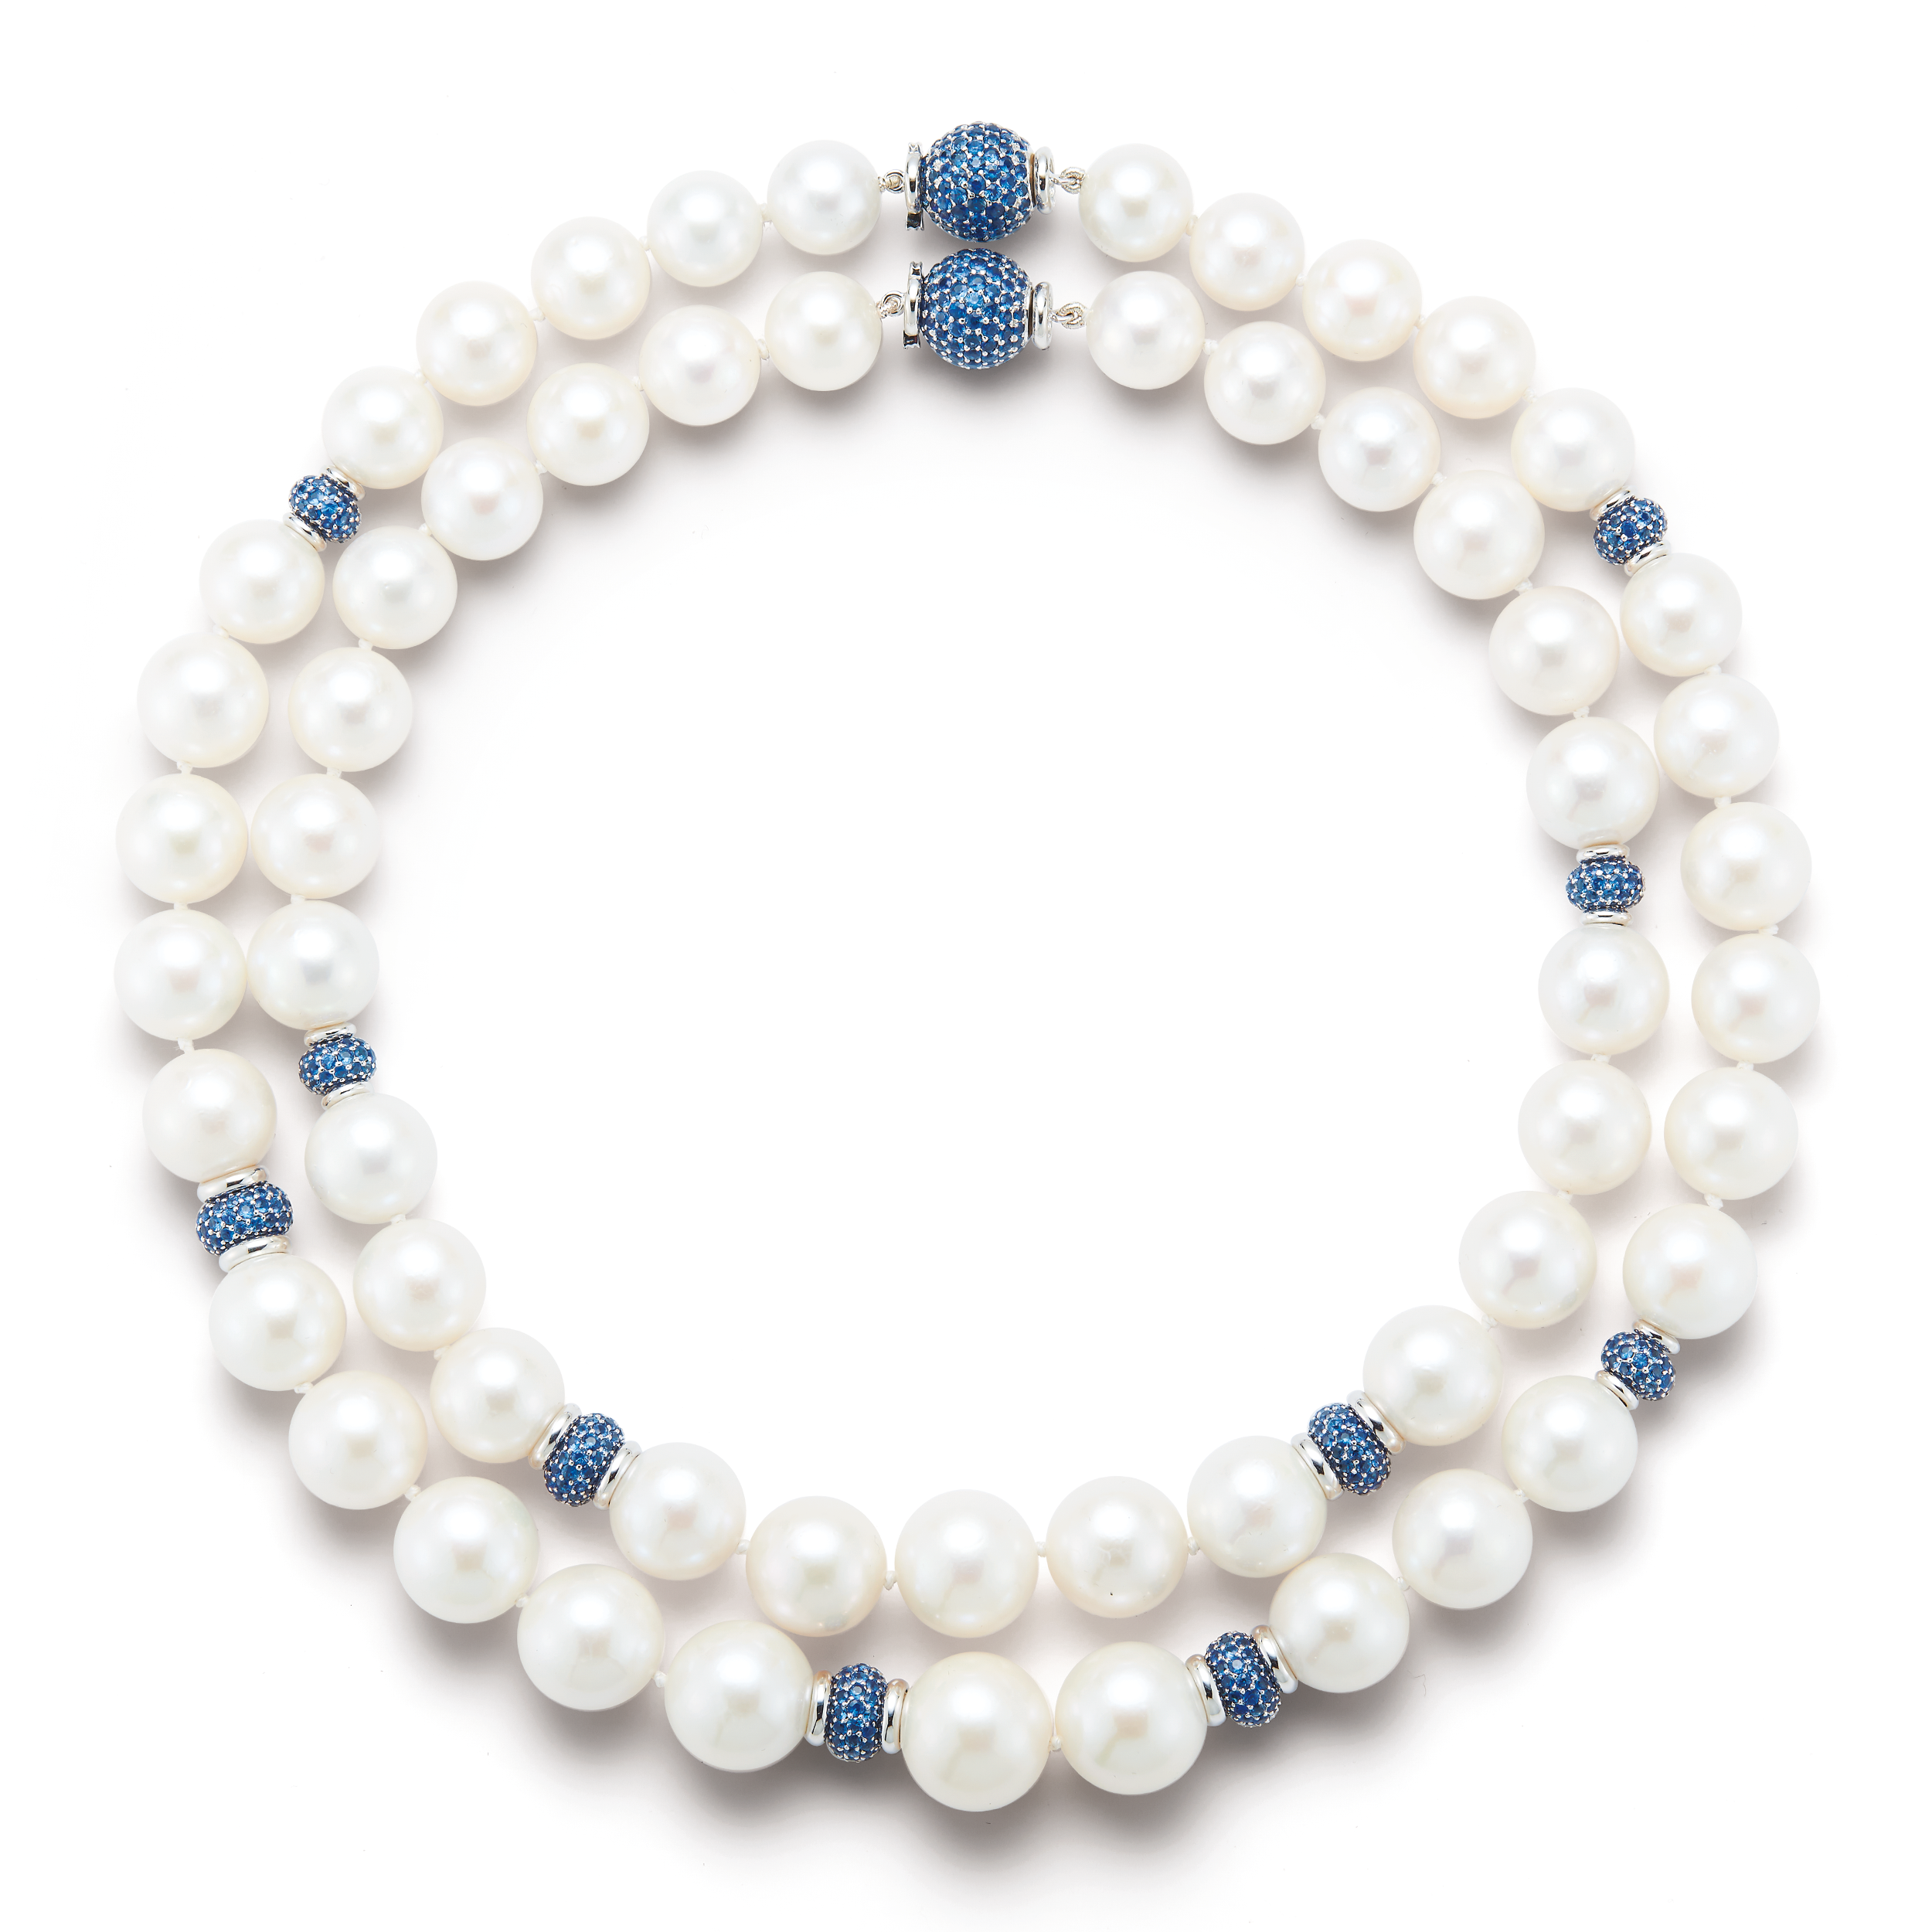 Juno Pearl Necklaces with Pave Sapphire